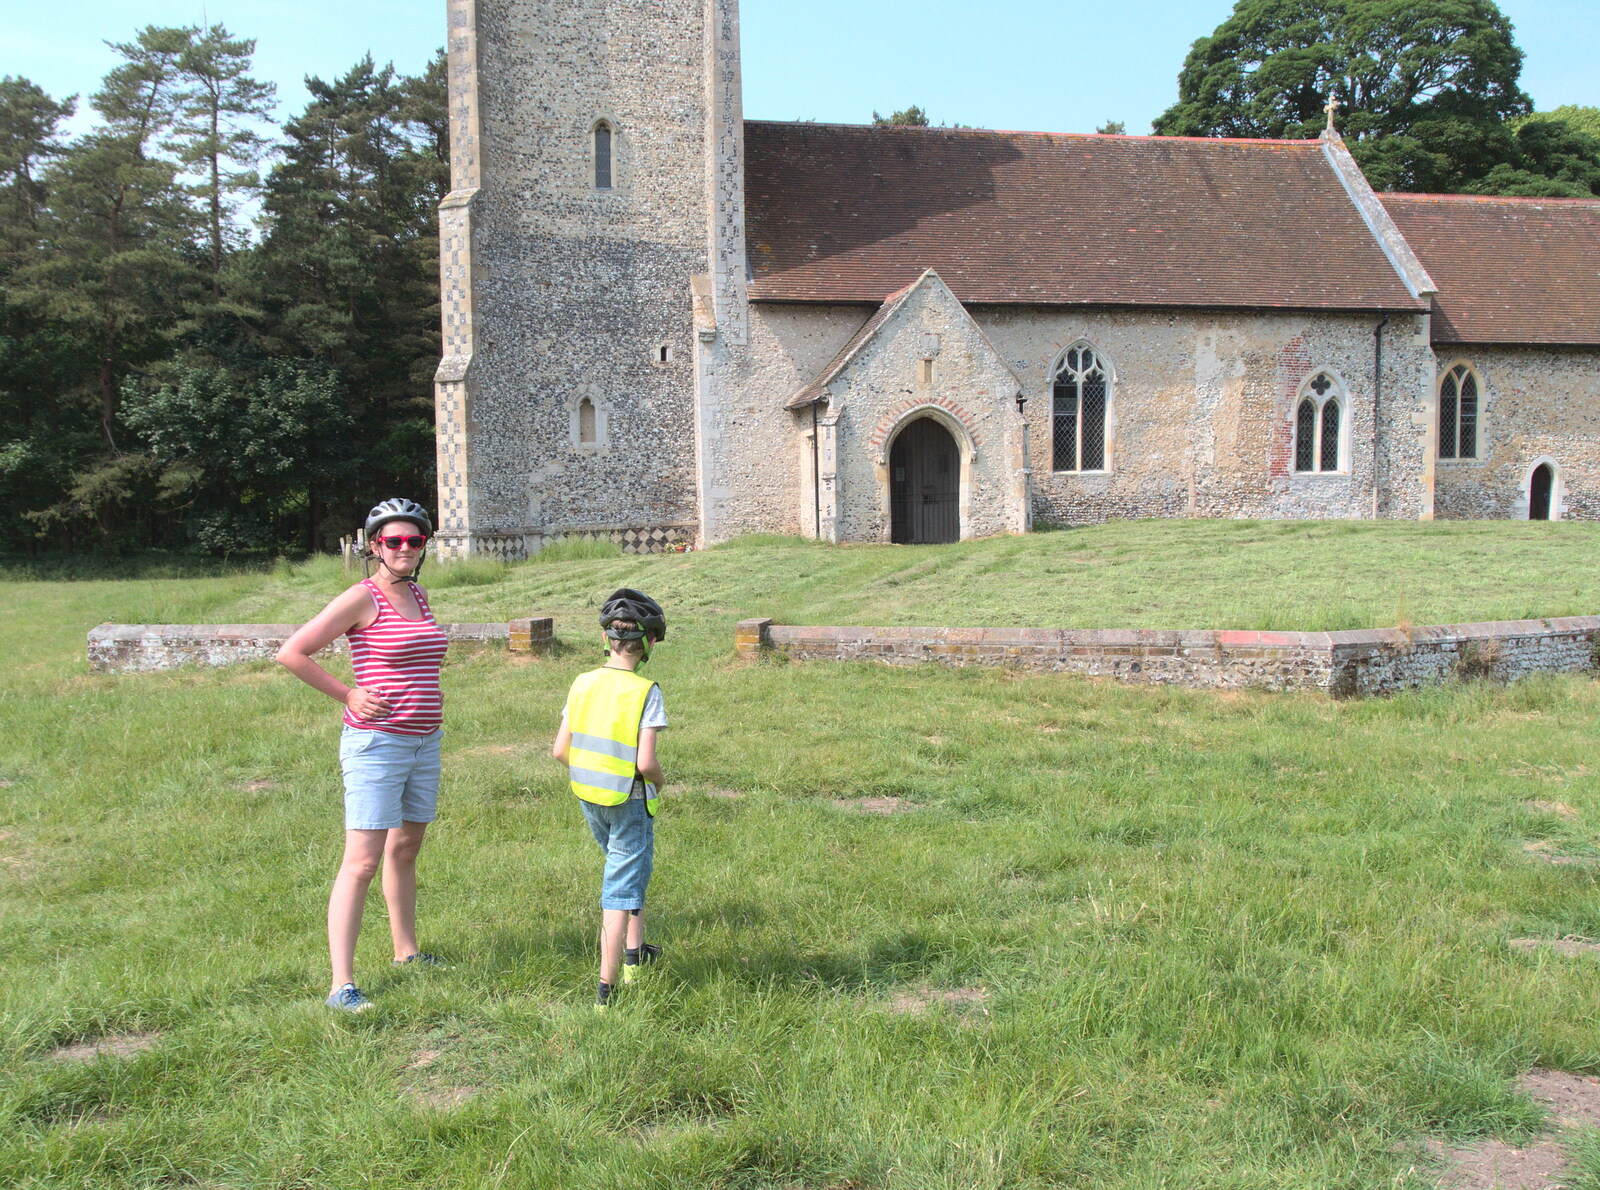 We visit the abandoned West Harling church again from Dower House Camping, West Harling, Norfolk - 27th May 2018